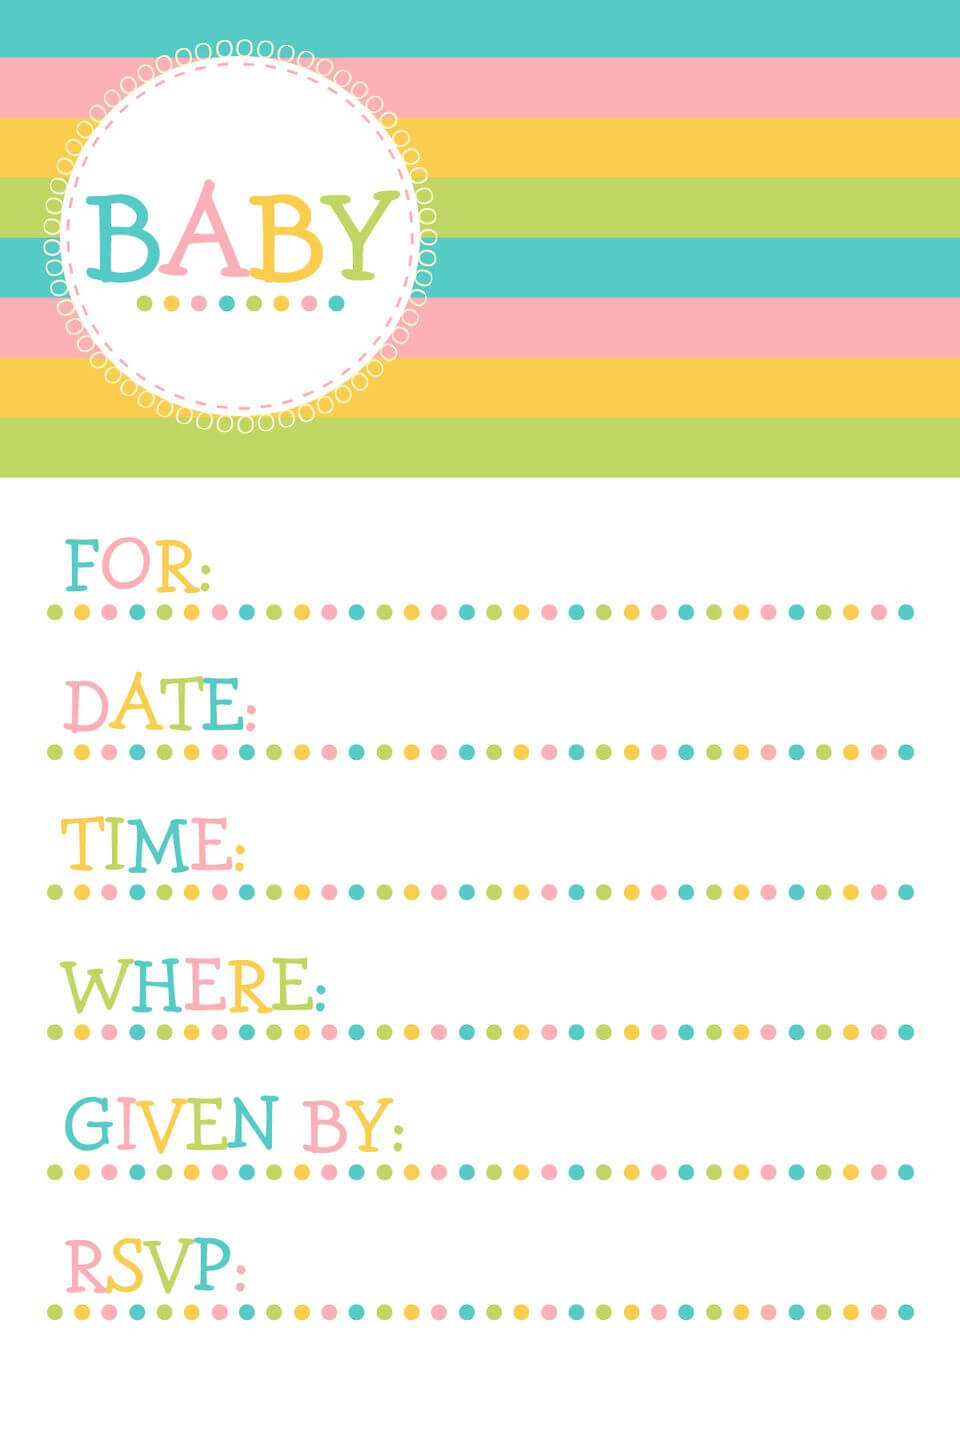 020 Free Baby Shower Invitation Template 1Pxxv4Kr Invite Throughout Baby Shower Invitation Templates For Word